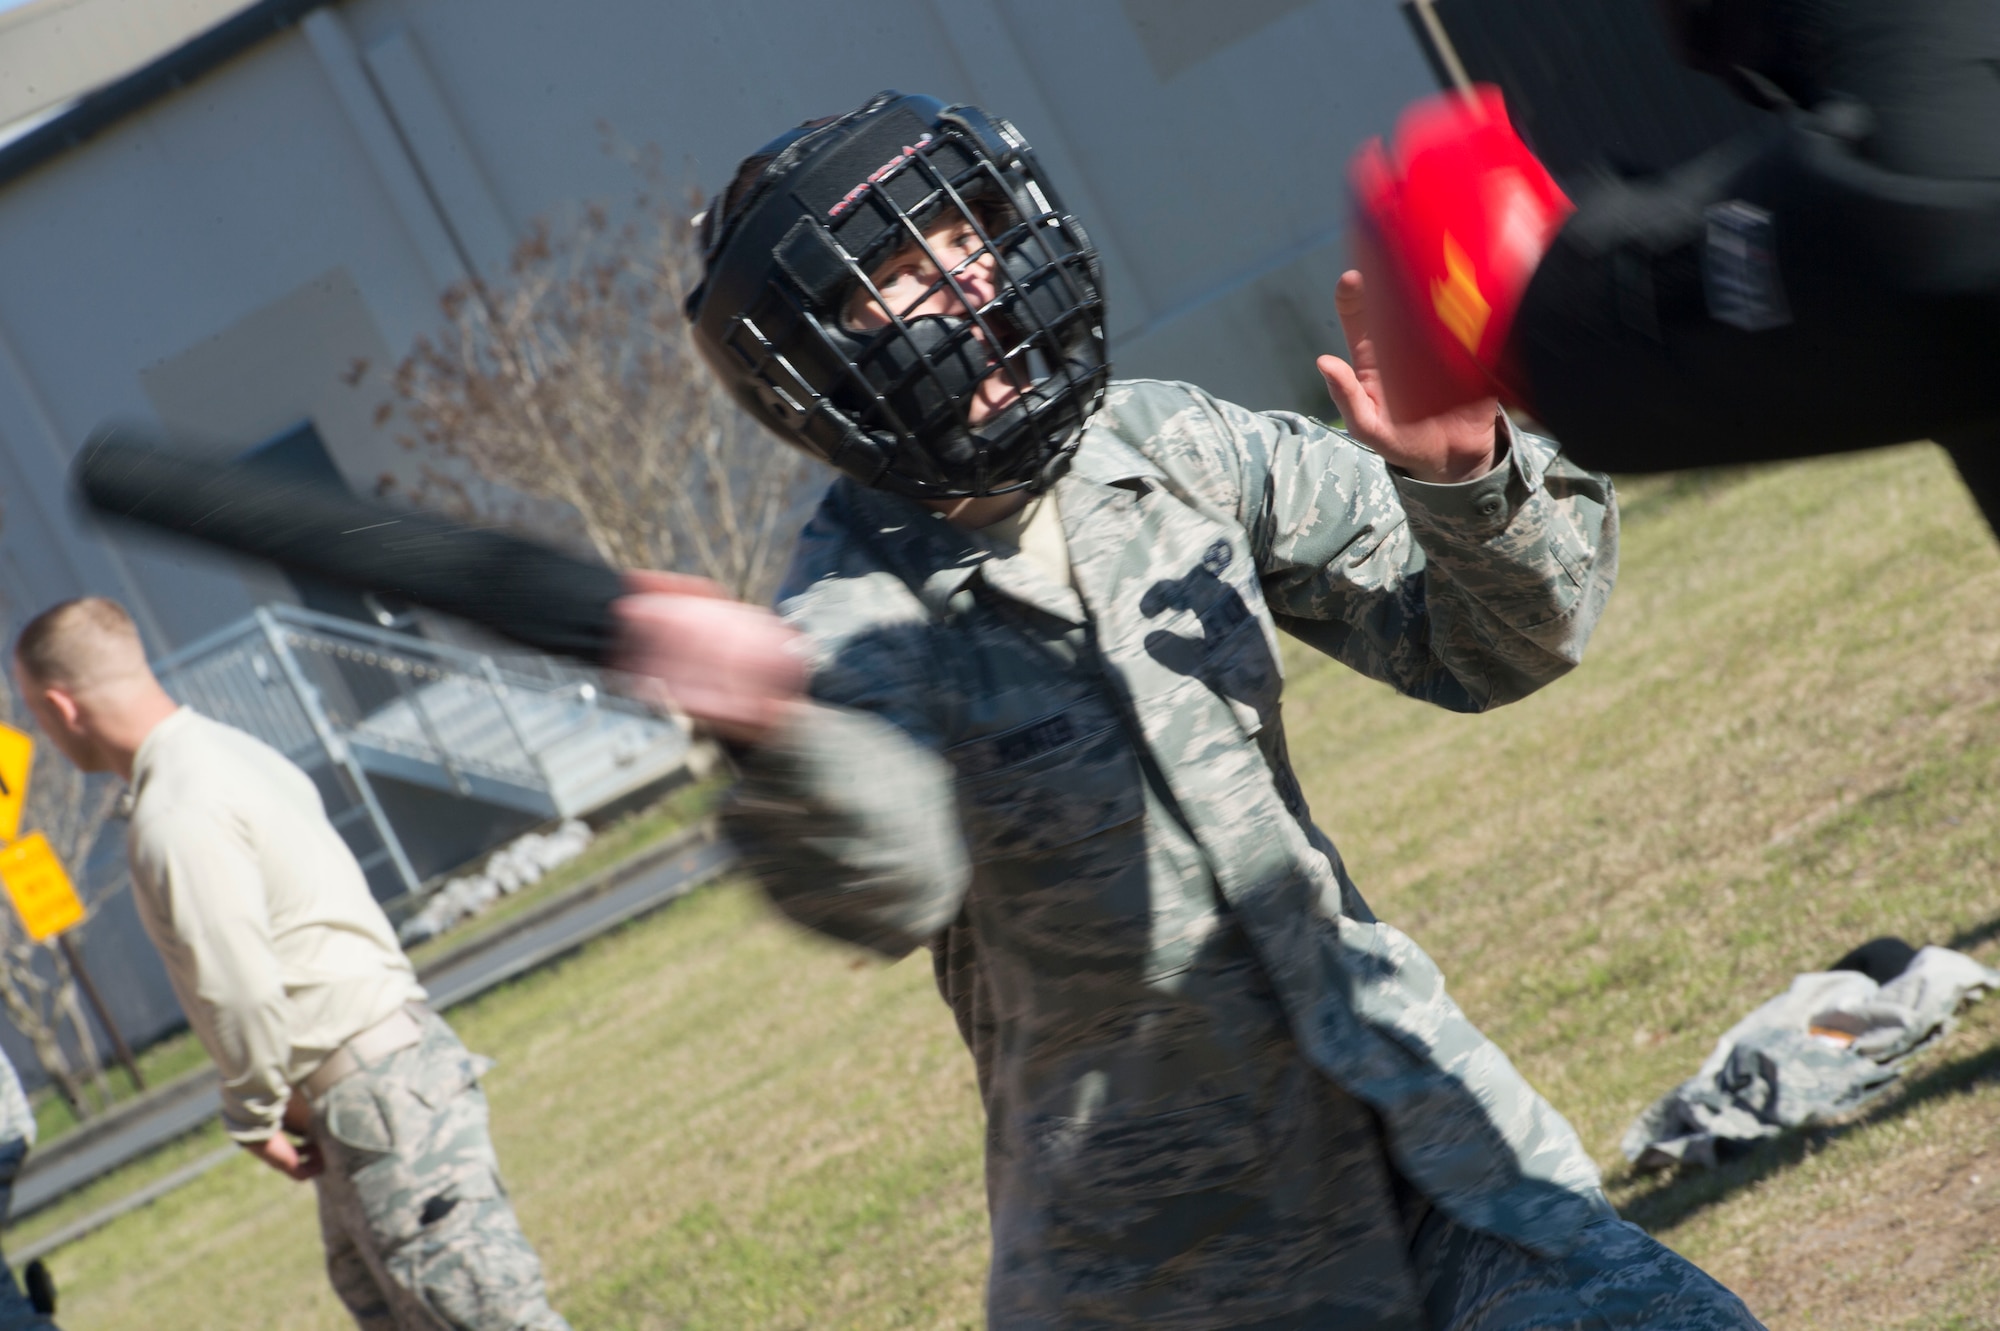 An Airman with the 1st Special Operations Security Forces Squadron practices during baton training at Hurlburt Field, Fla., Feb. 10, 2016. Security Forces personnel participate in combat scenario exercises to gain real-world experience. (U.S. Air Force photo by Senior Airman Krystal M. Garrett)